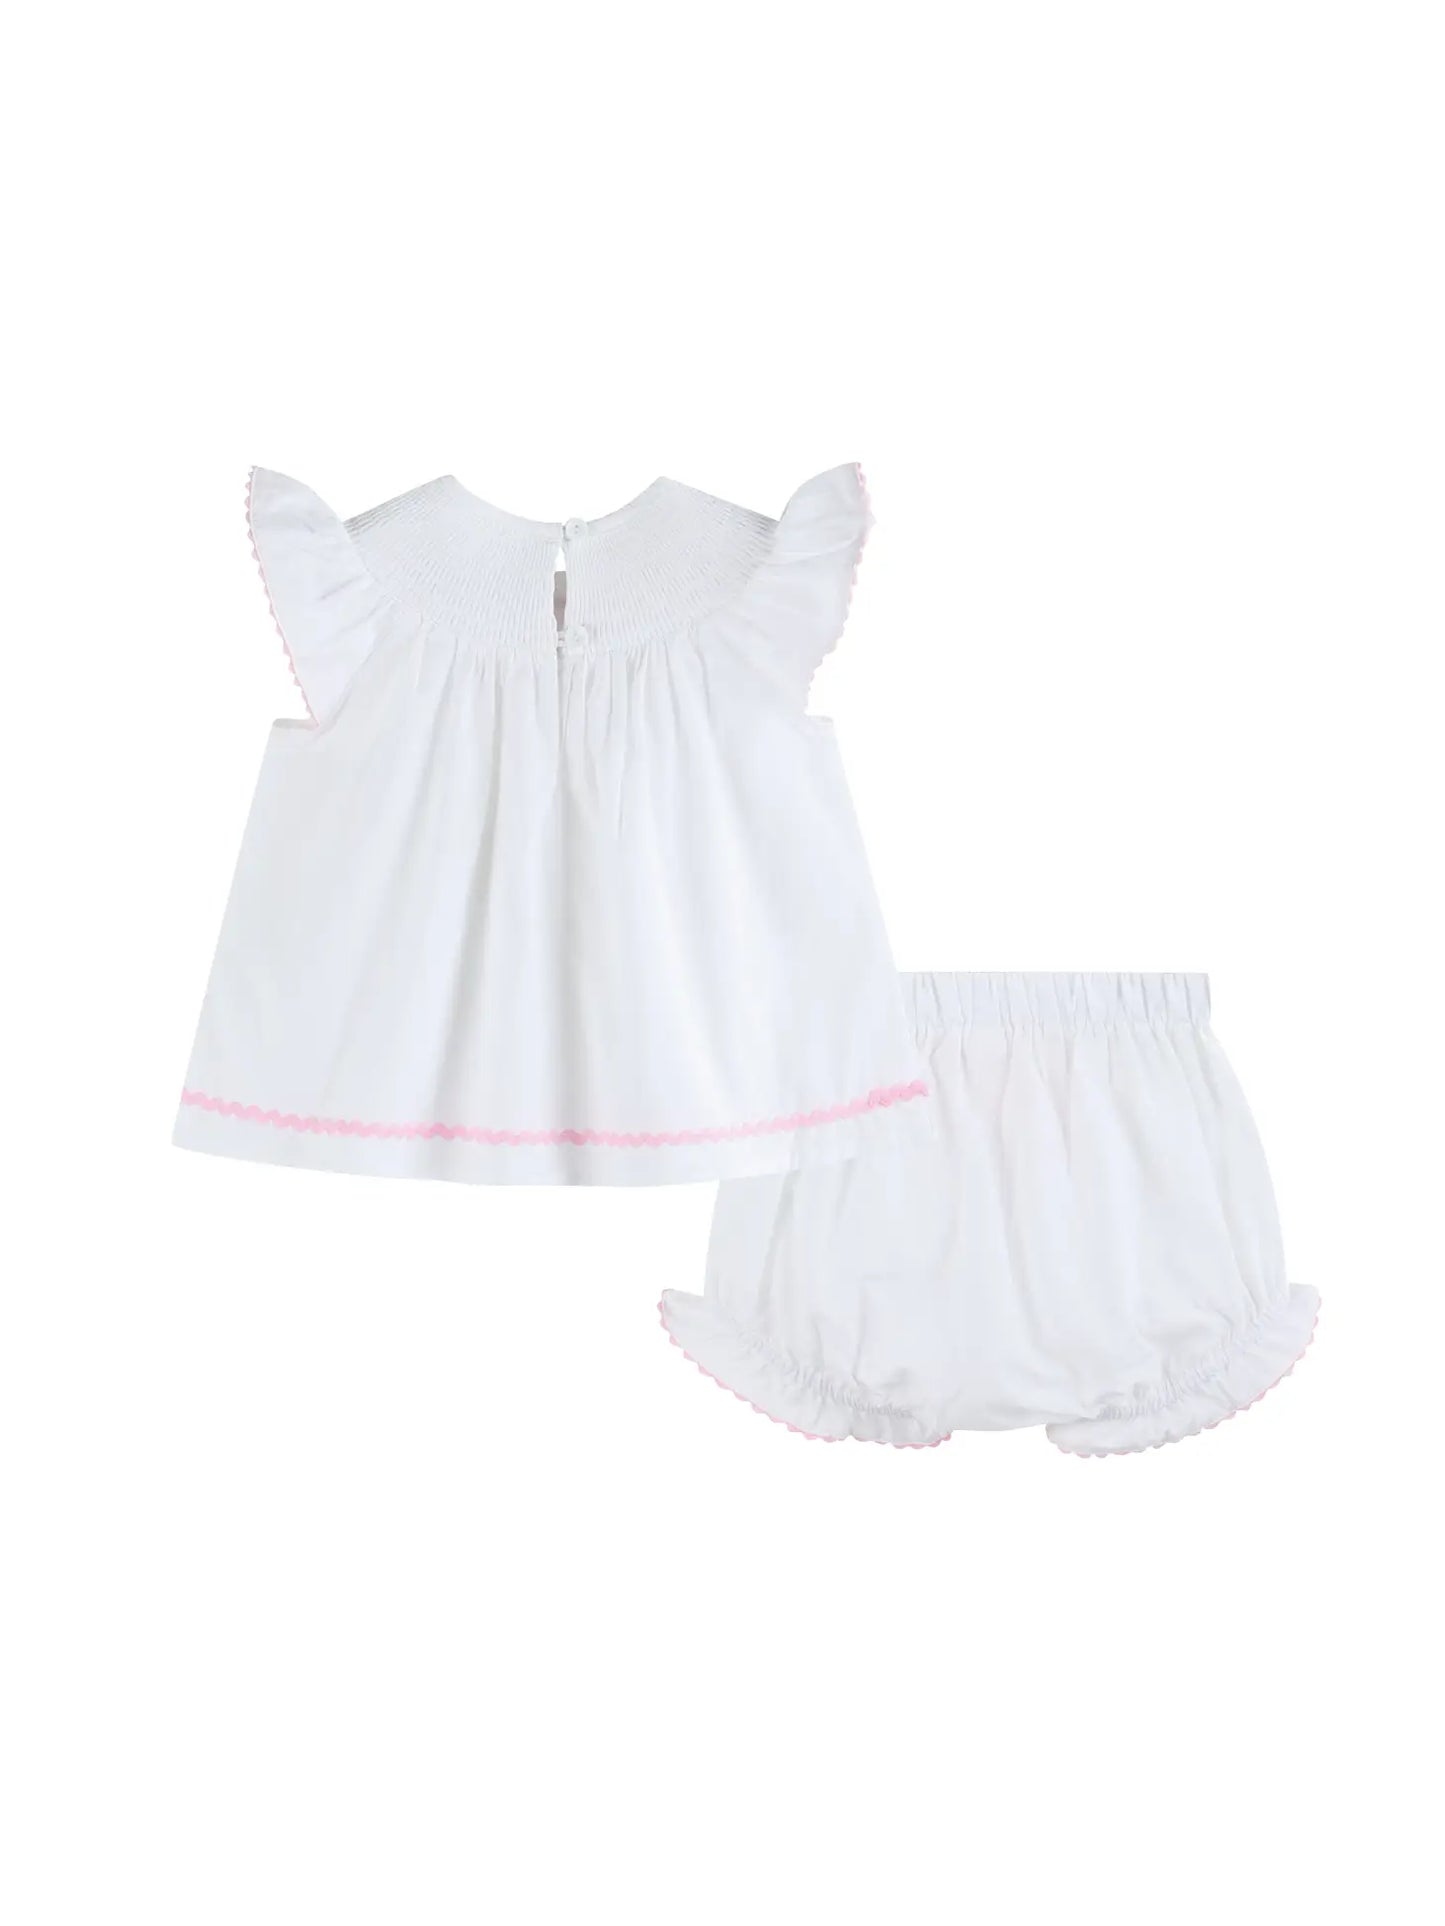 White and Pink Cross Smocked Dress & Bloomers Set